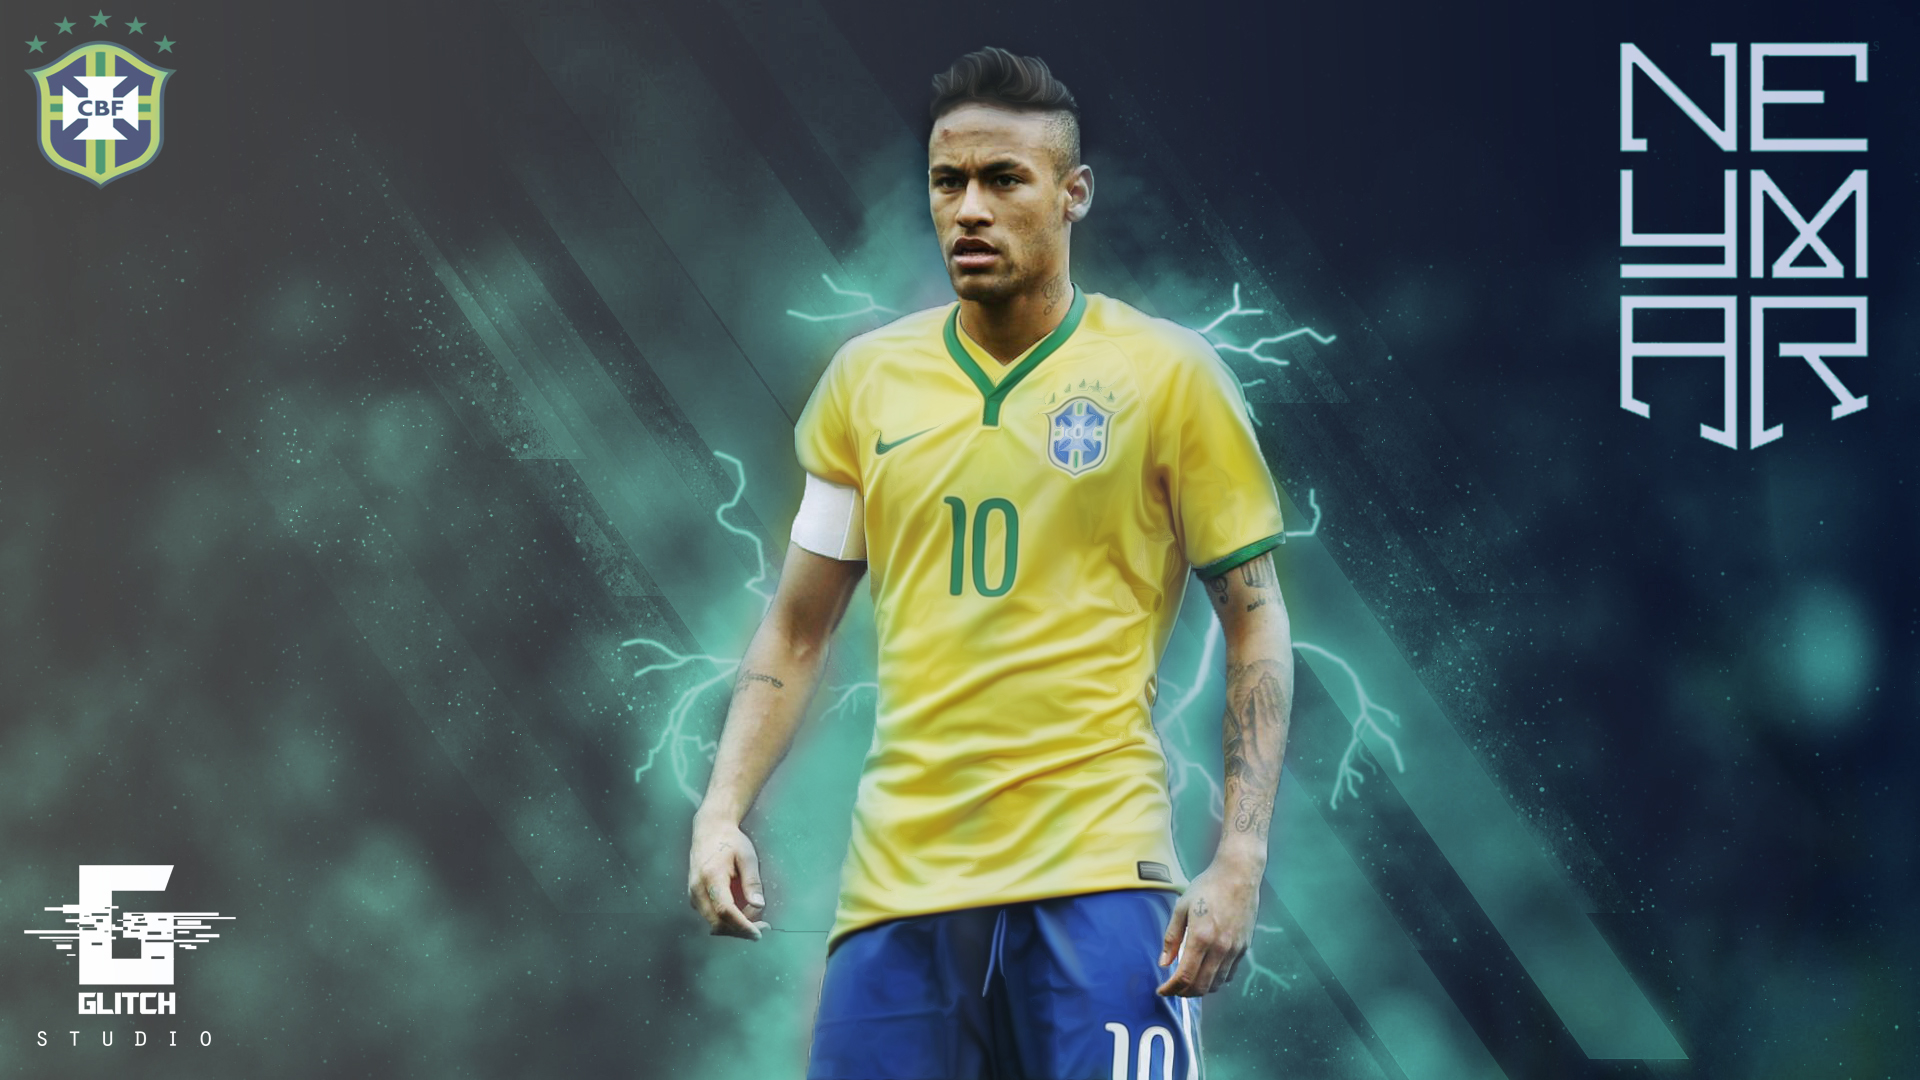 Neymar 10 Wallpaper, HD Sports 4K Wallpapers, Images, Photos and Background  - Wallpapers Den